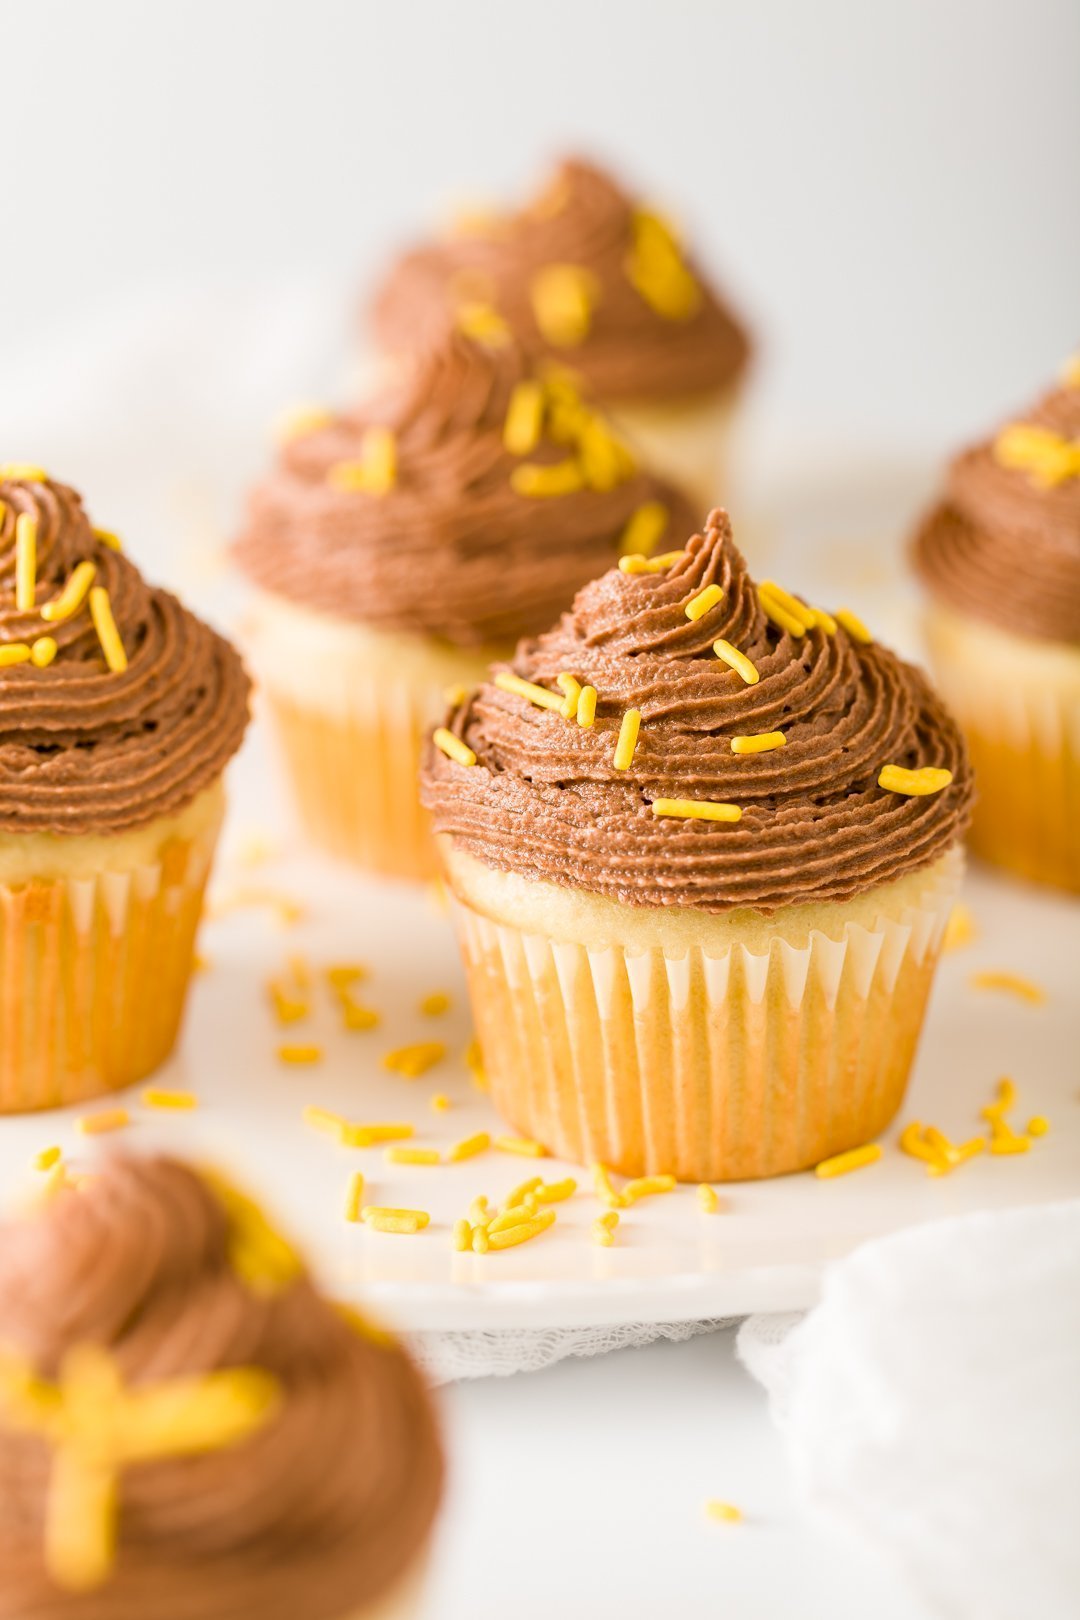 Chocolate Peanut Butter Banana Frosting